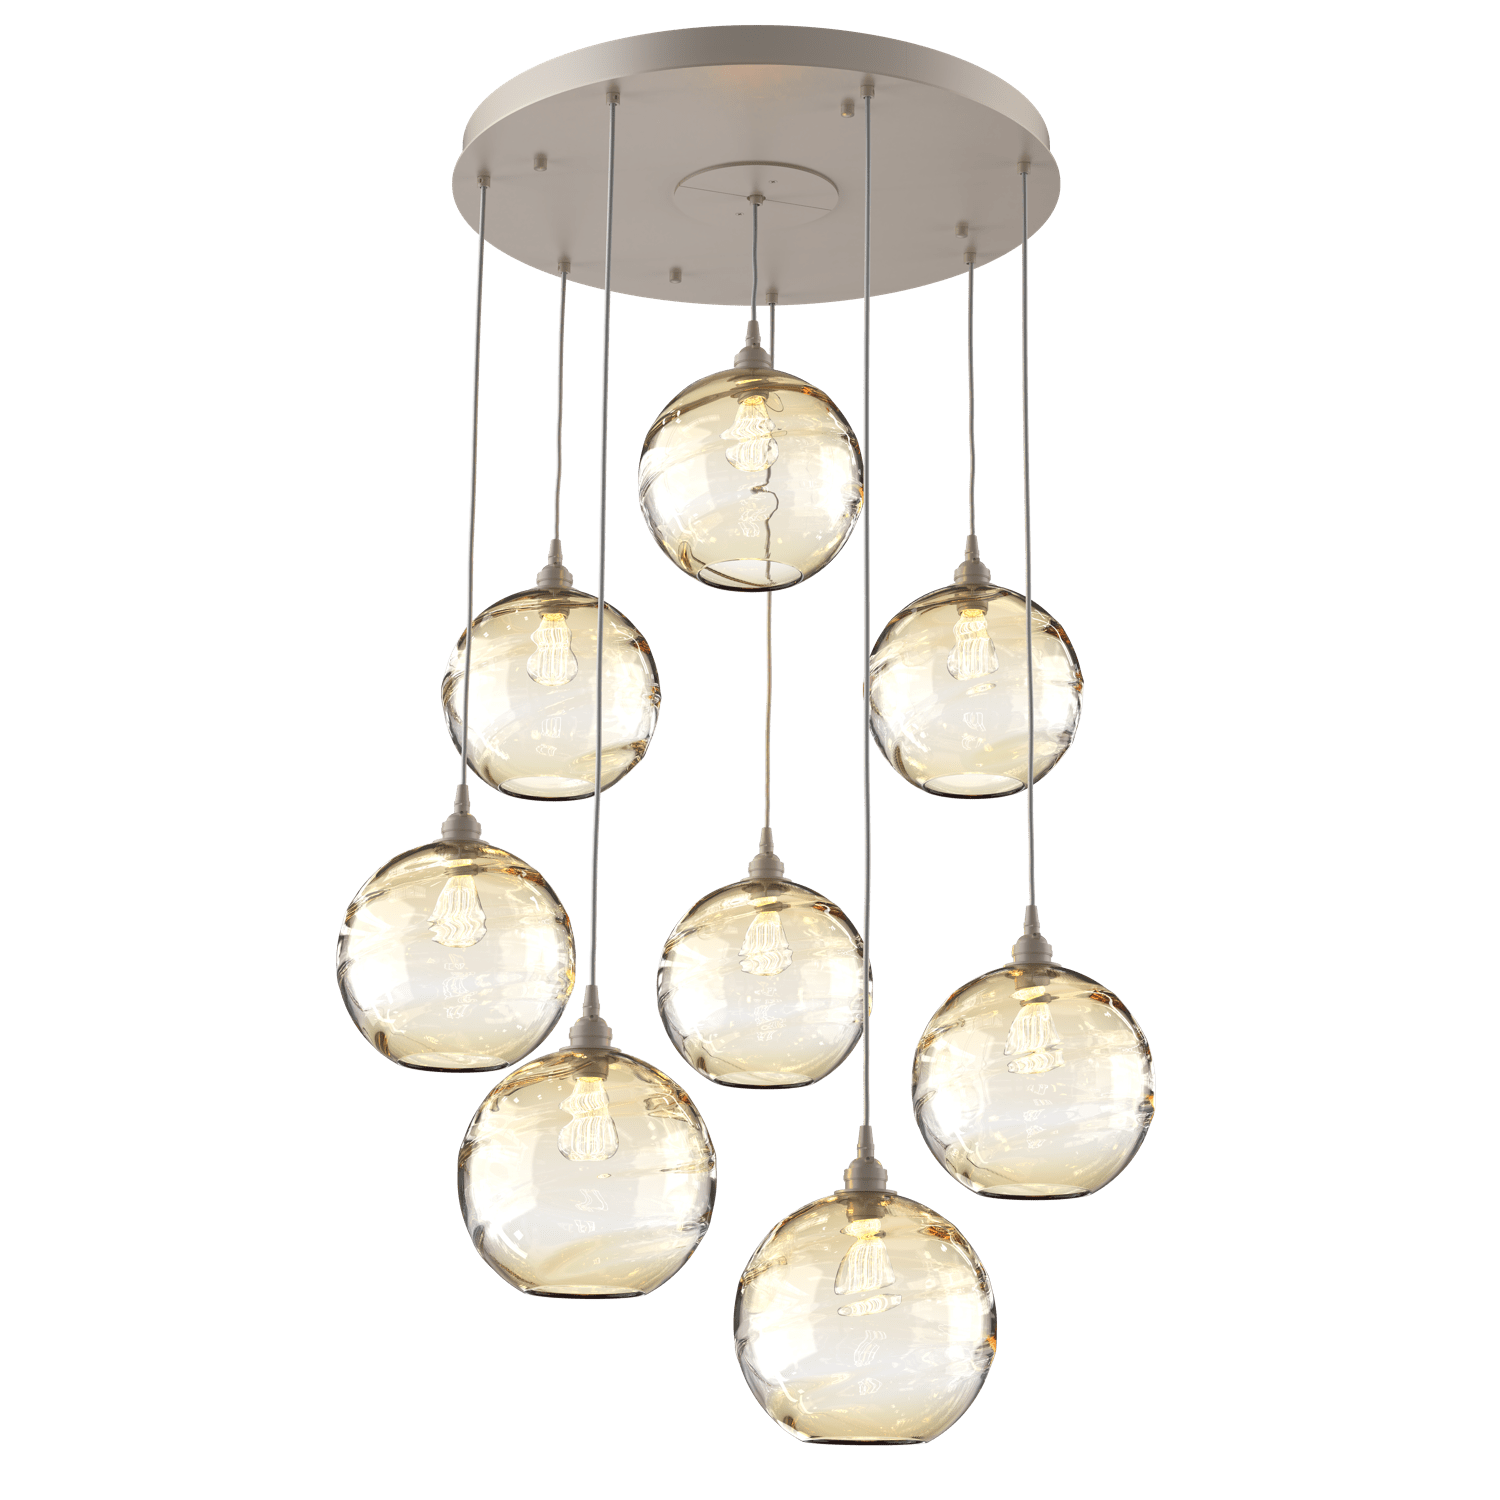 CHB0047-08-BS-OA-Hammerton-Studio-Optic-Blown-Glass-Terra-8-light-round-pendant-chandelier-with-metallic-beige-silver-finish-and-optic-amber-blown-glass-shades-and-incandescent-lamping